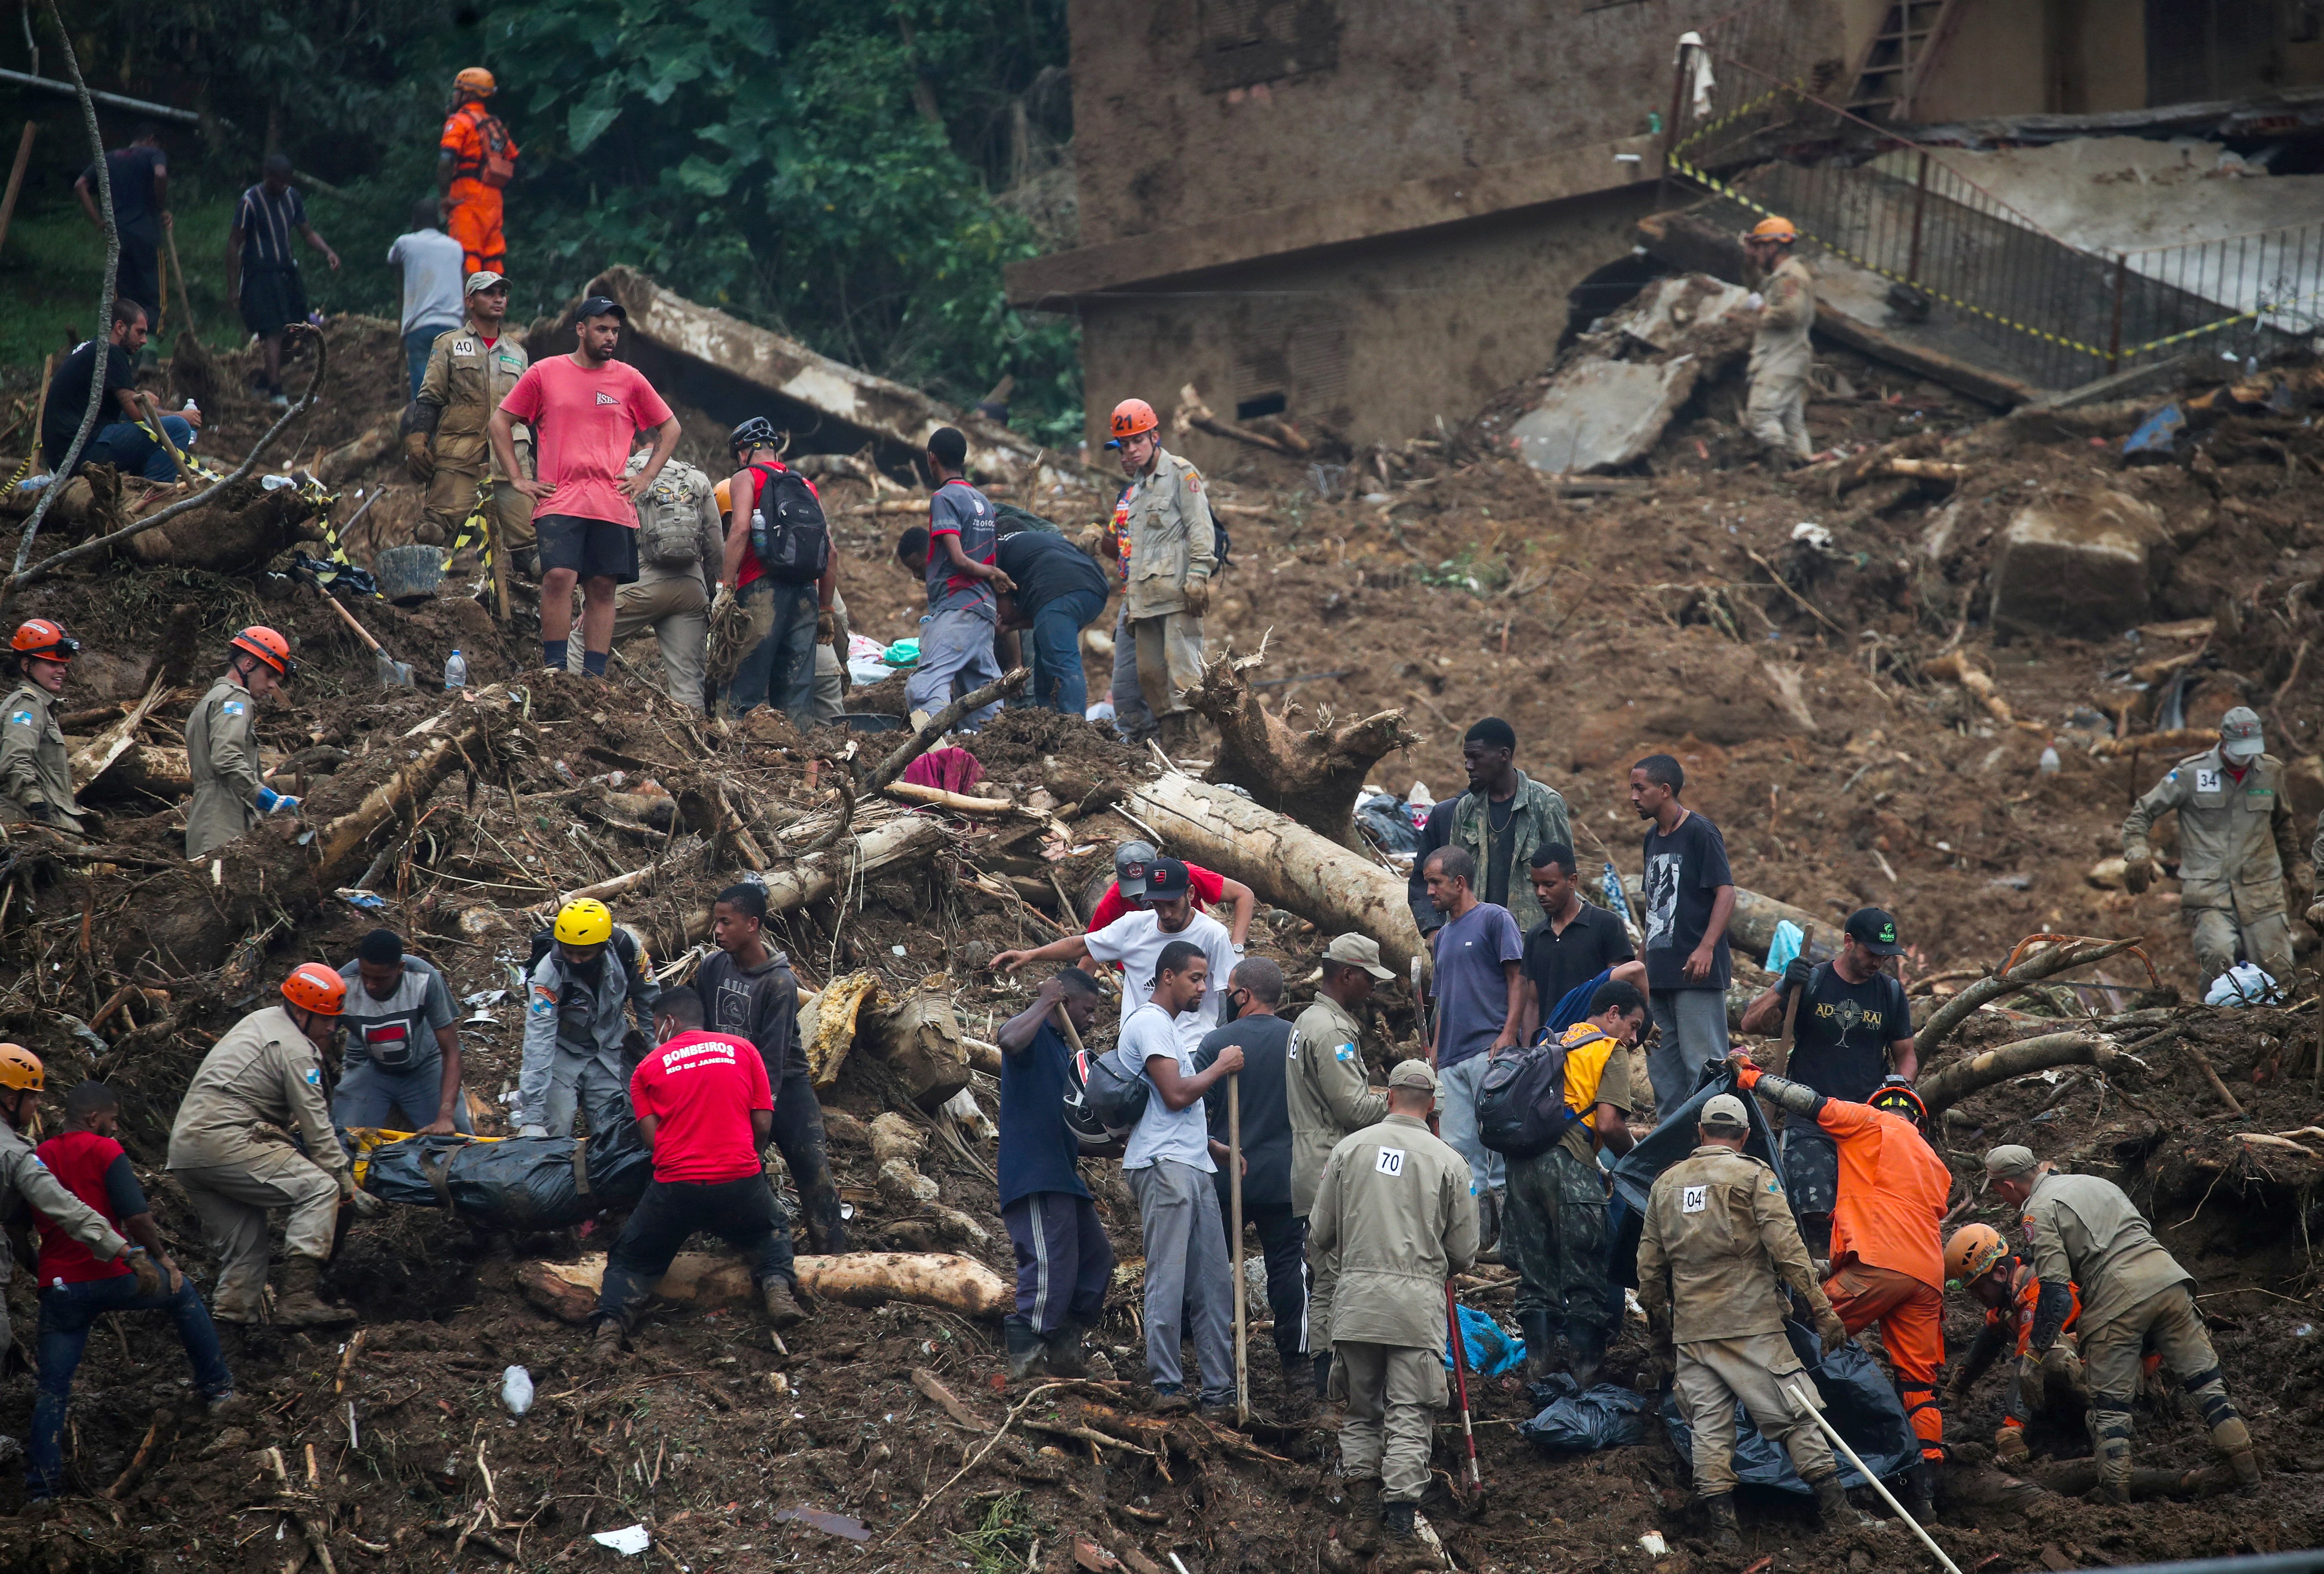 Rescue workers and residents remove a body at the site of a mudslide in Petrópolis, Brazil, Feb. 16, 2022. (CNS photo/Ricardo Moraes, Reuters)